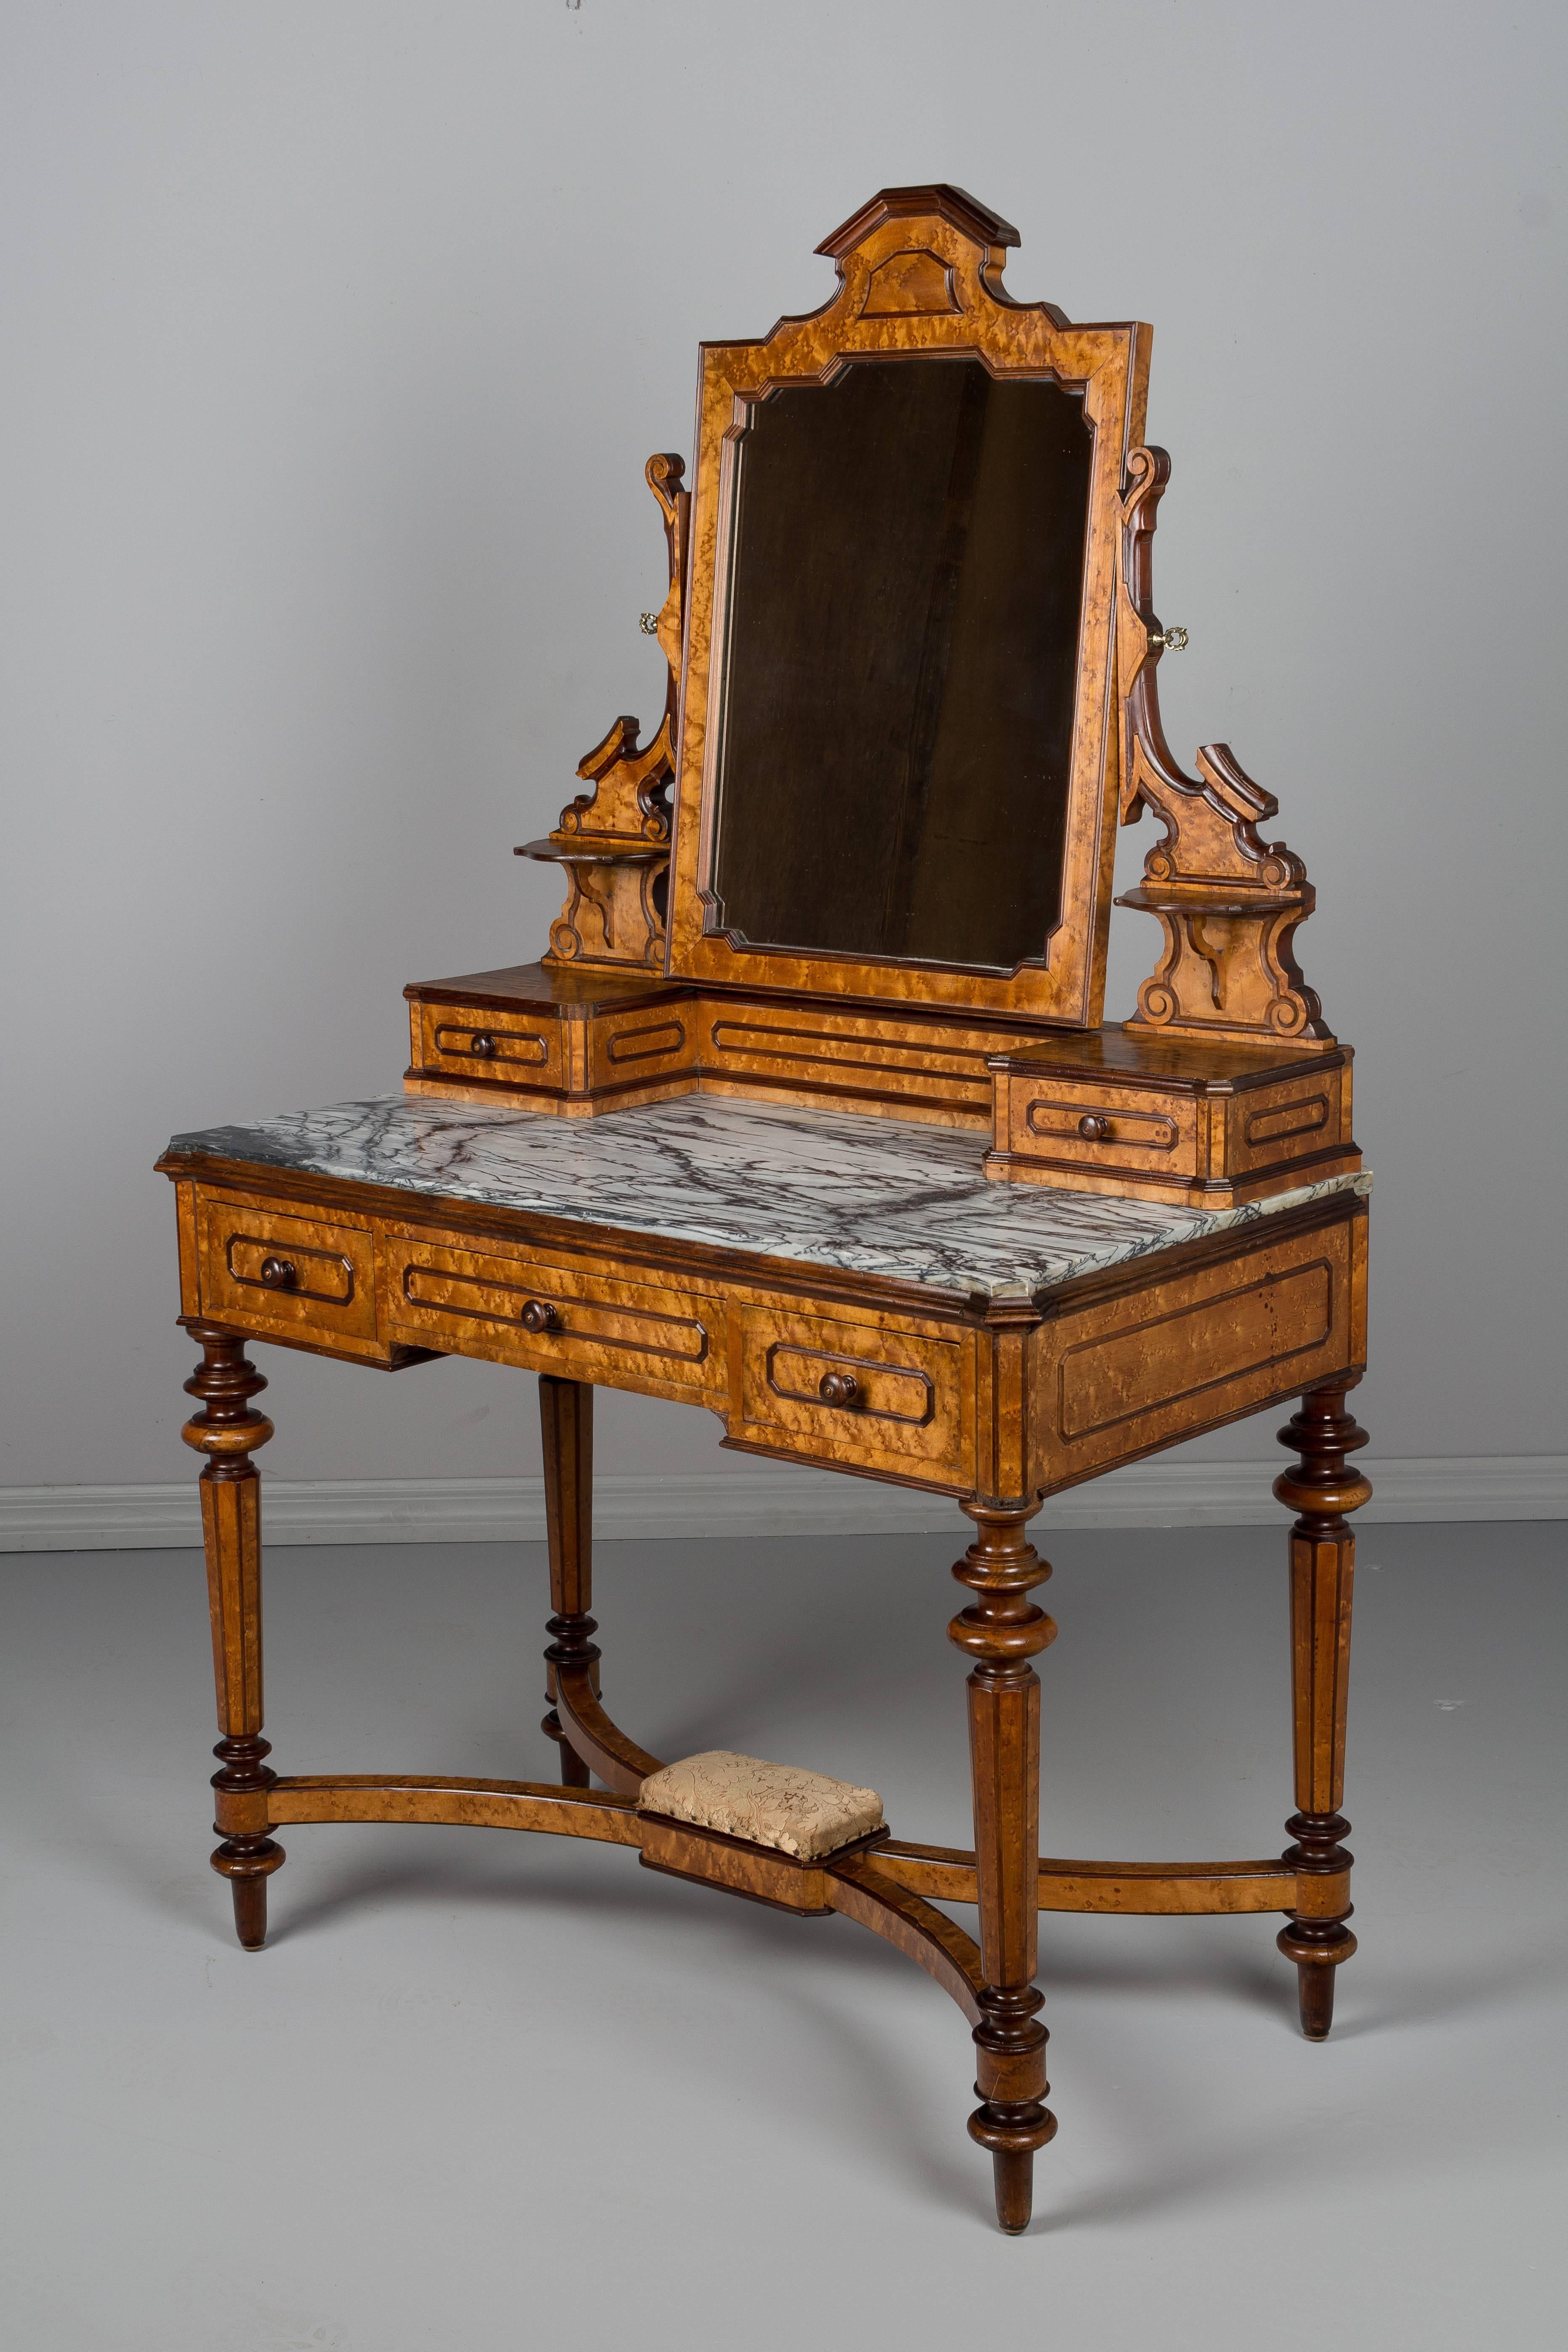 A fine 19th century Italian vanity with pivoting mirror and five dovetailed drawers. Made of solid mahogany and veneer of bird's-eye maple. Original grey veined marble top. Turned legs and stretcher with brocade upholstered foot rest. Manufacture's